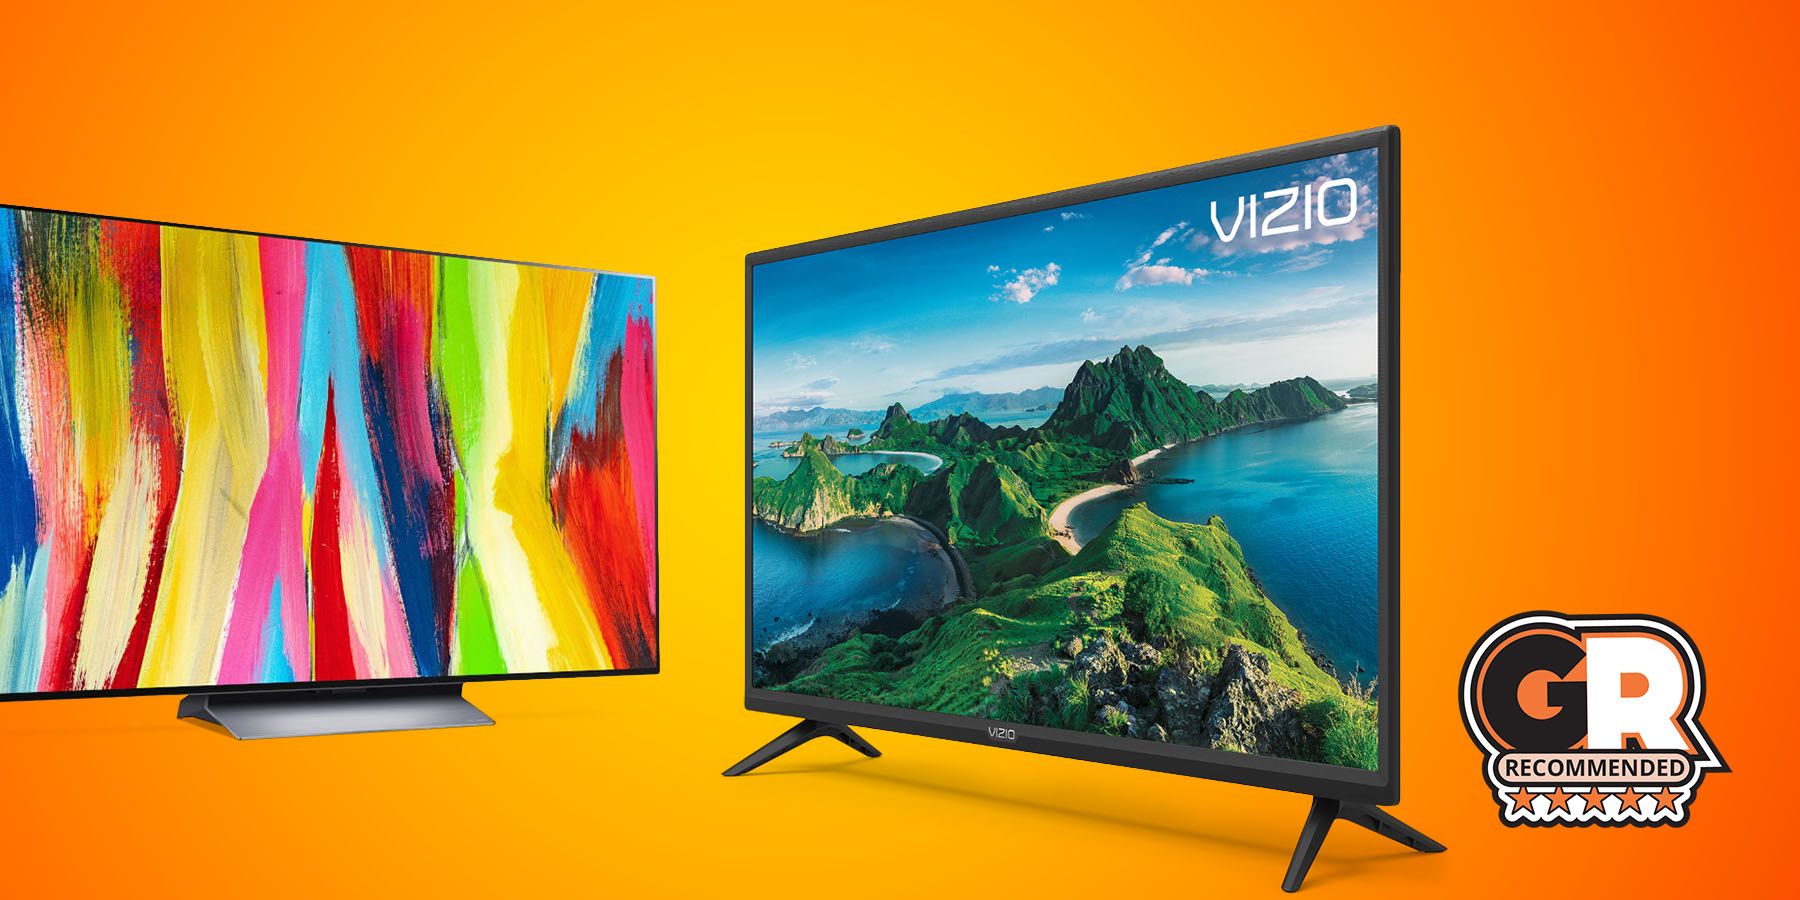 Looking for a new TV? These 8 deals will suit every budget